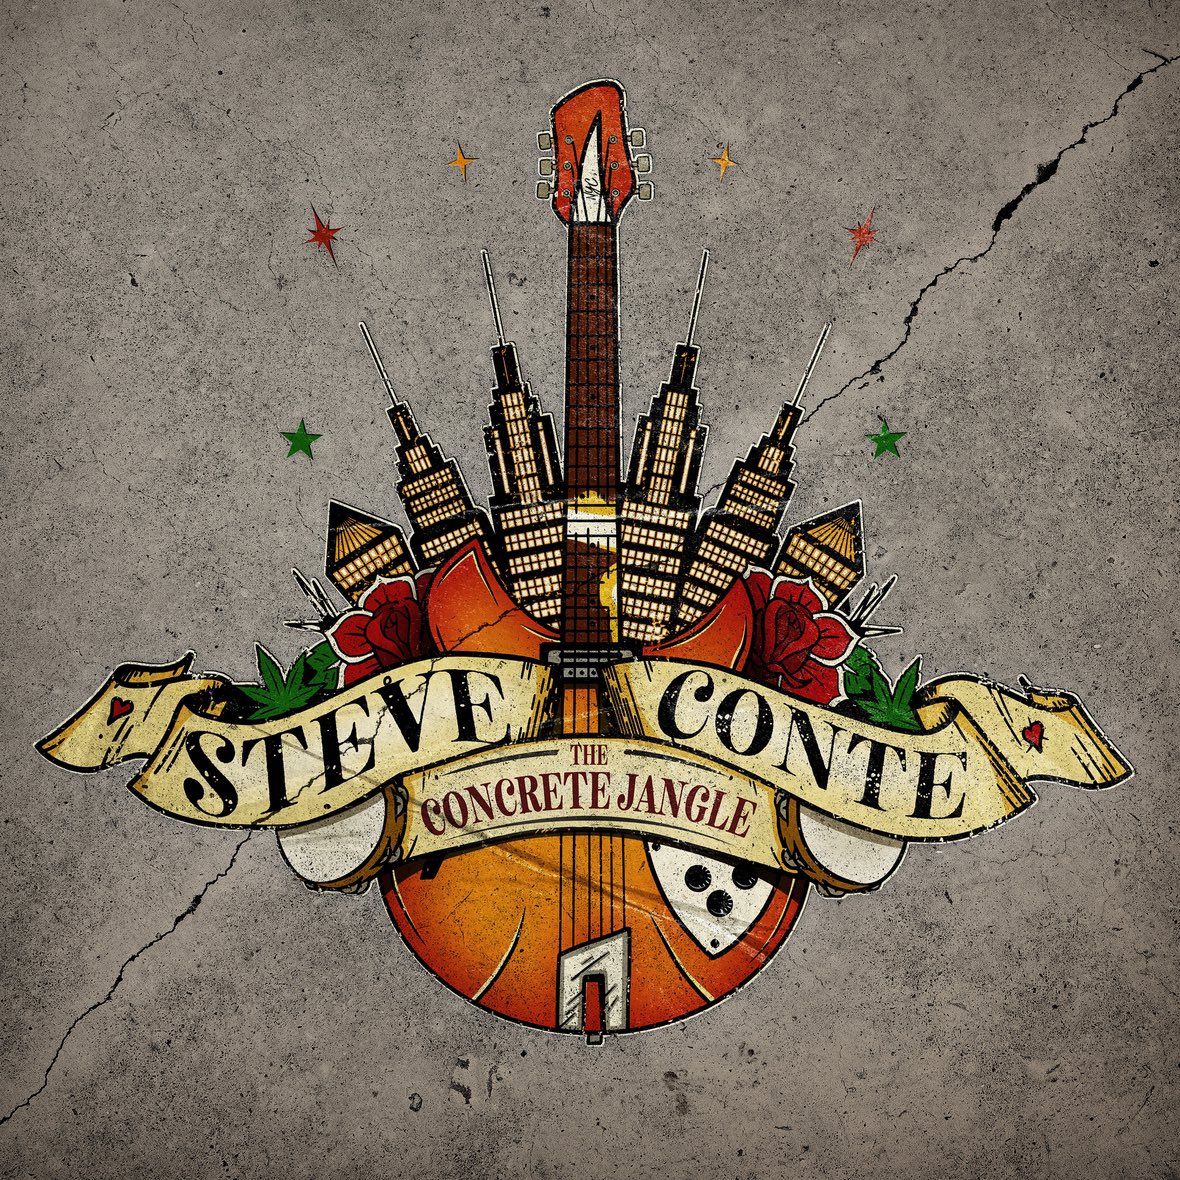 Renowned musician Steve Conte, known for his work with the Company Of Wolves, New York Dolls and Michael Monroe, has released his new album, 'The Concrete Jangle,' the highly anticipated successor to his 2021 opus 'Bronx Cheer.' Stream/buy 'The Concrete Jangle' here: